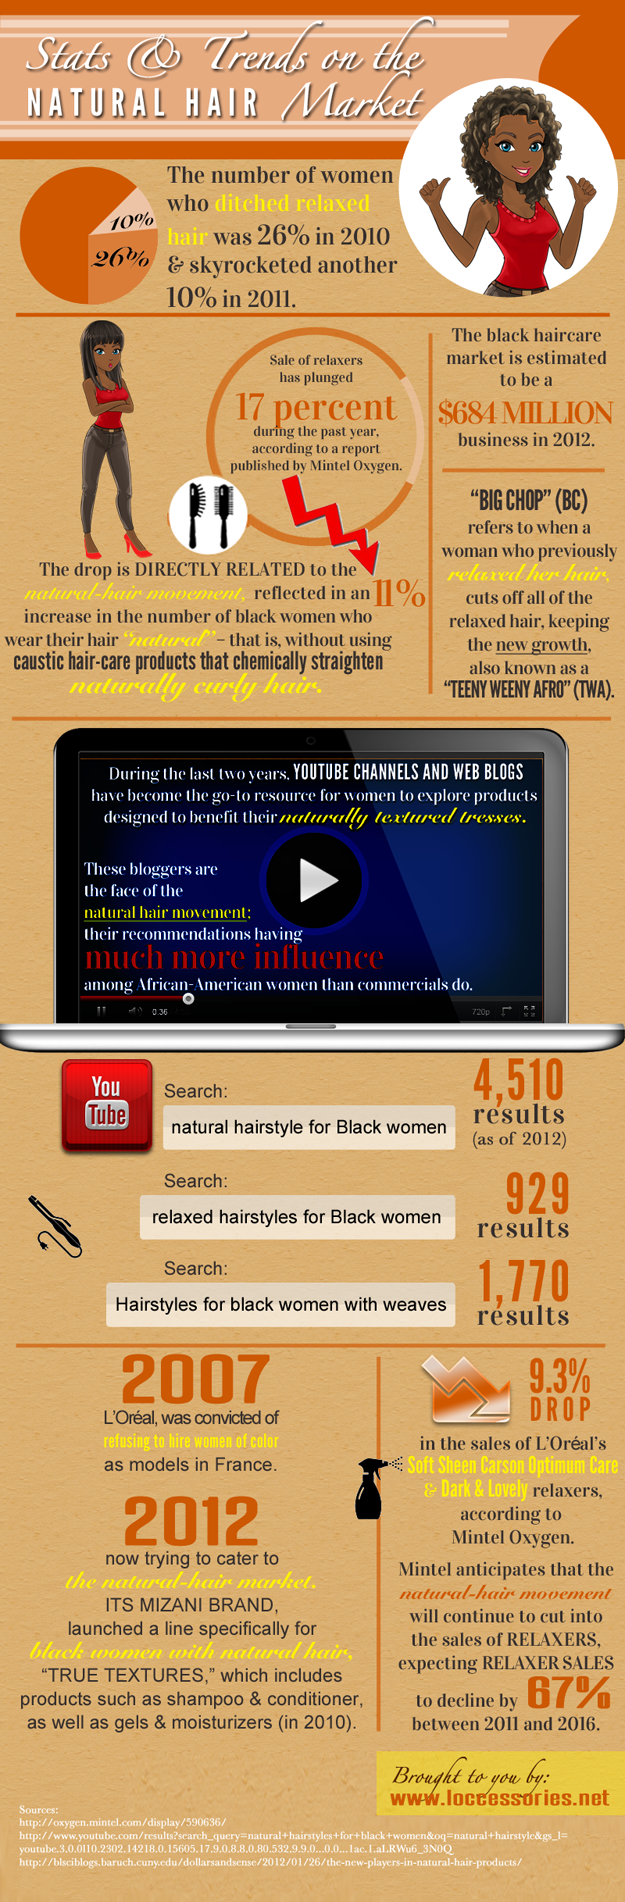 natural-hair-trends-infographic